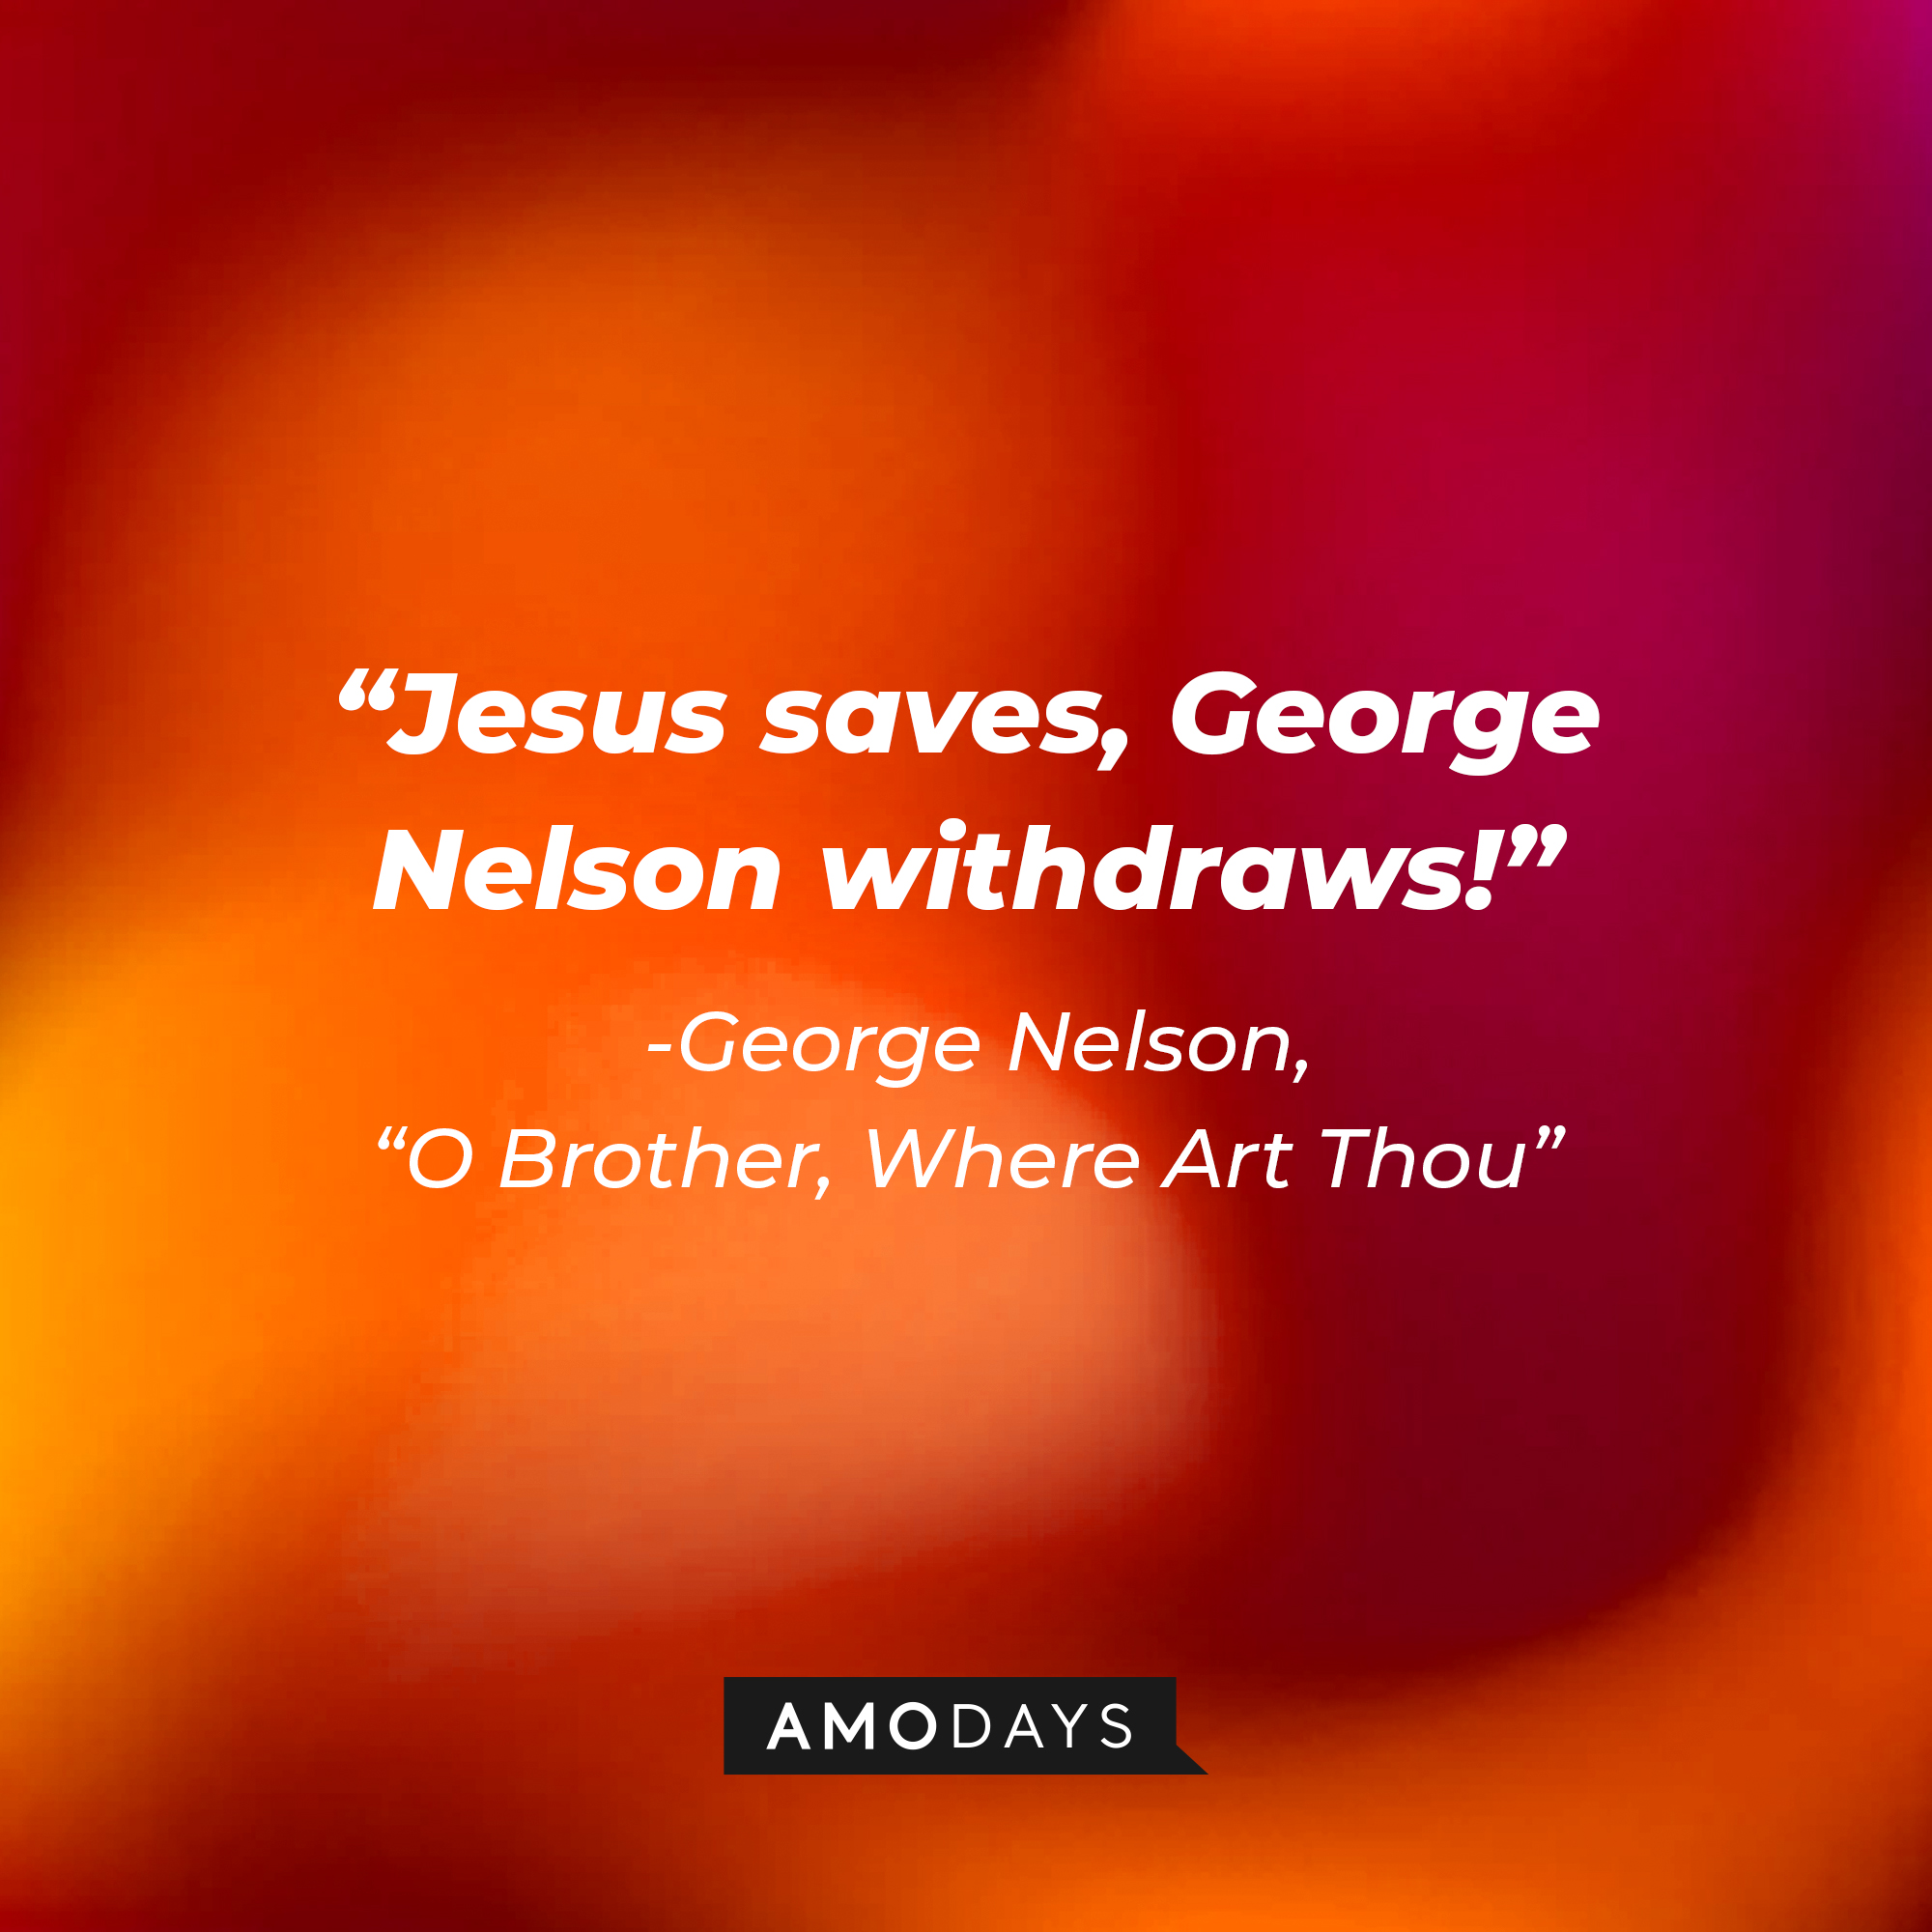 George Nelson's quote in "O Brother, Where Art Thou:" "Jesus saves, George Nelson withdraws!" | Source: AmoDays